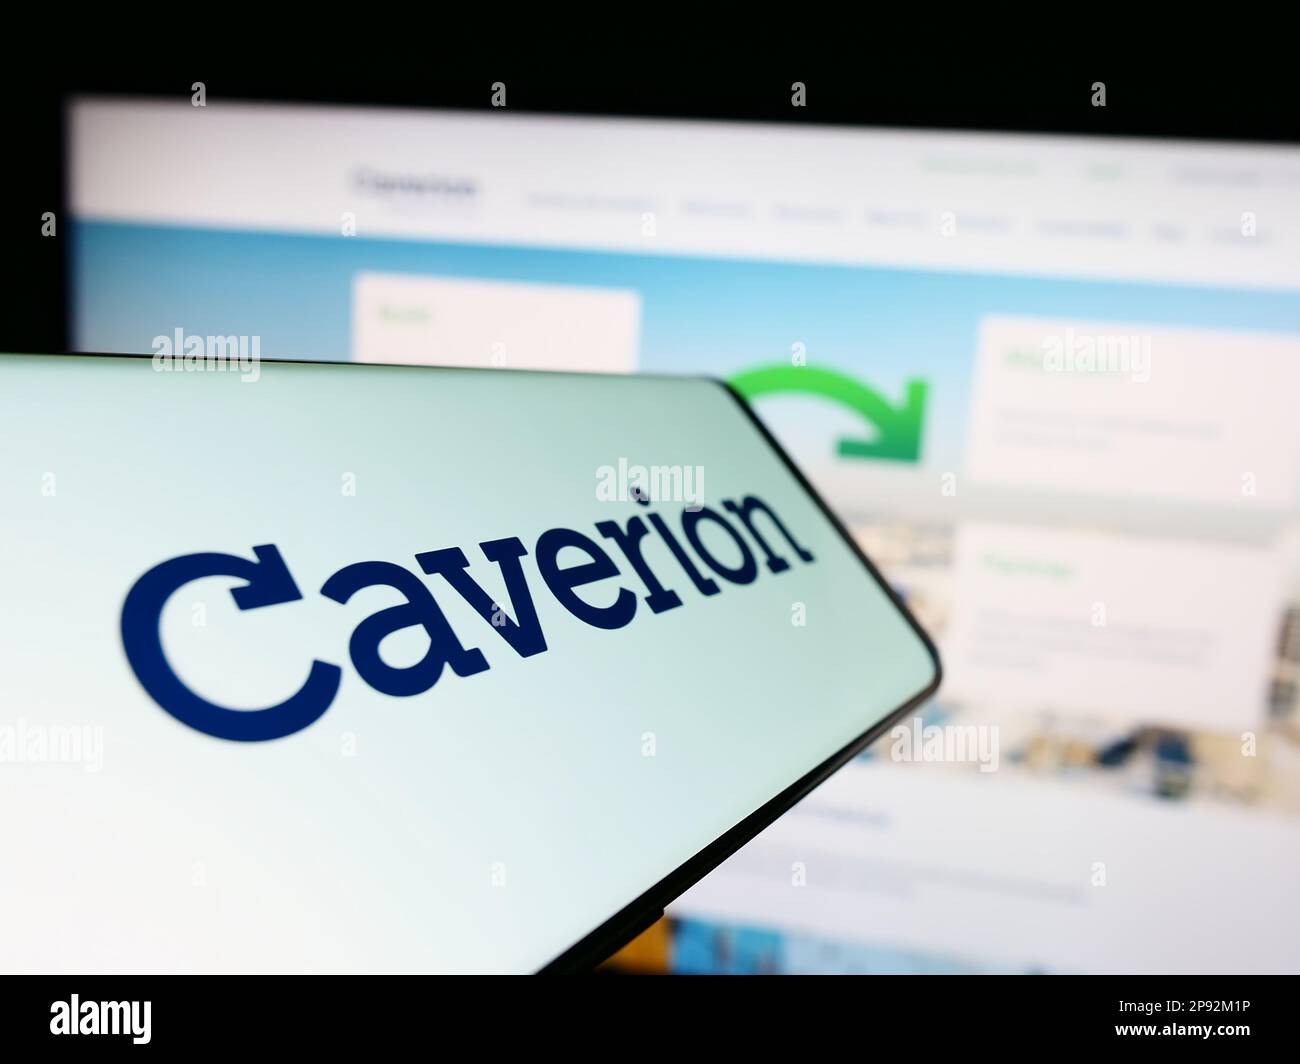 Smartphone with logo of building technology company Caverion Oyj on screen in front of business website. Focus on center of phone display. Stock Photo